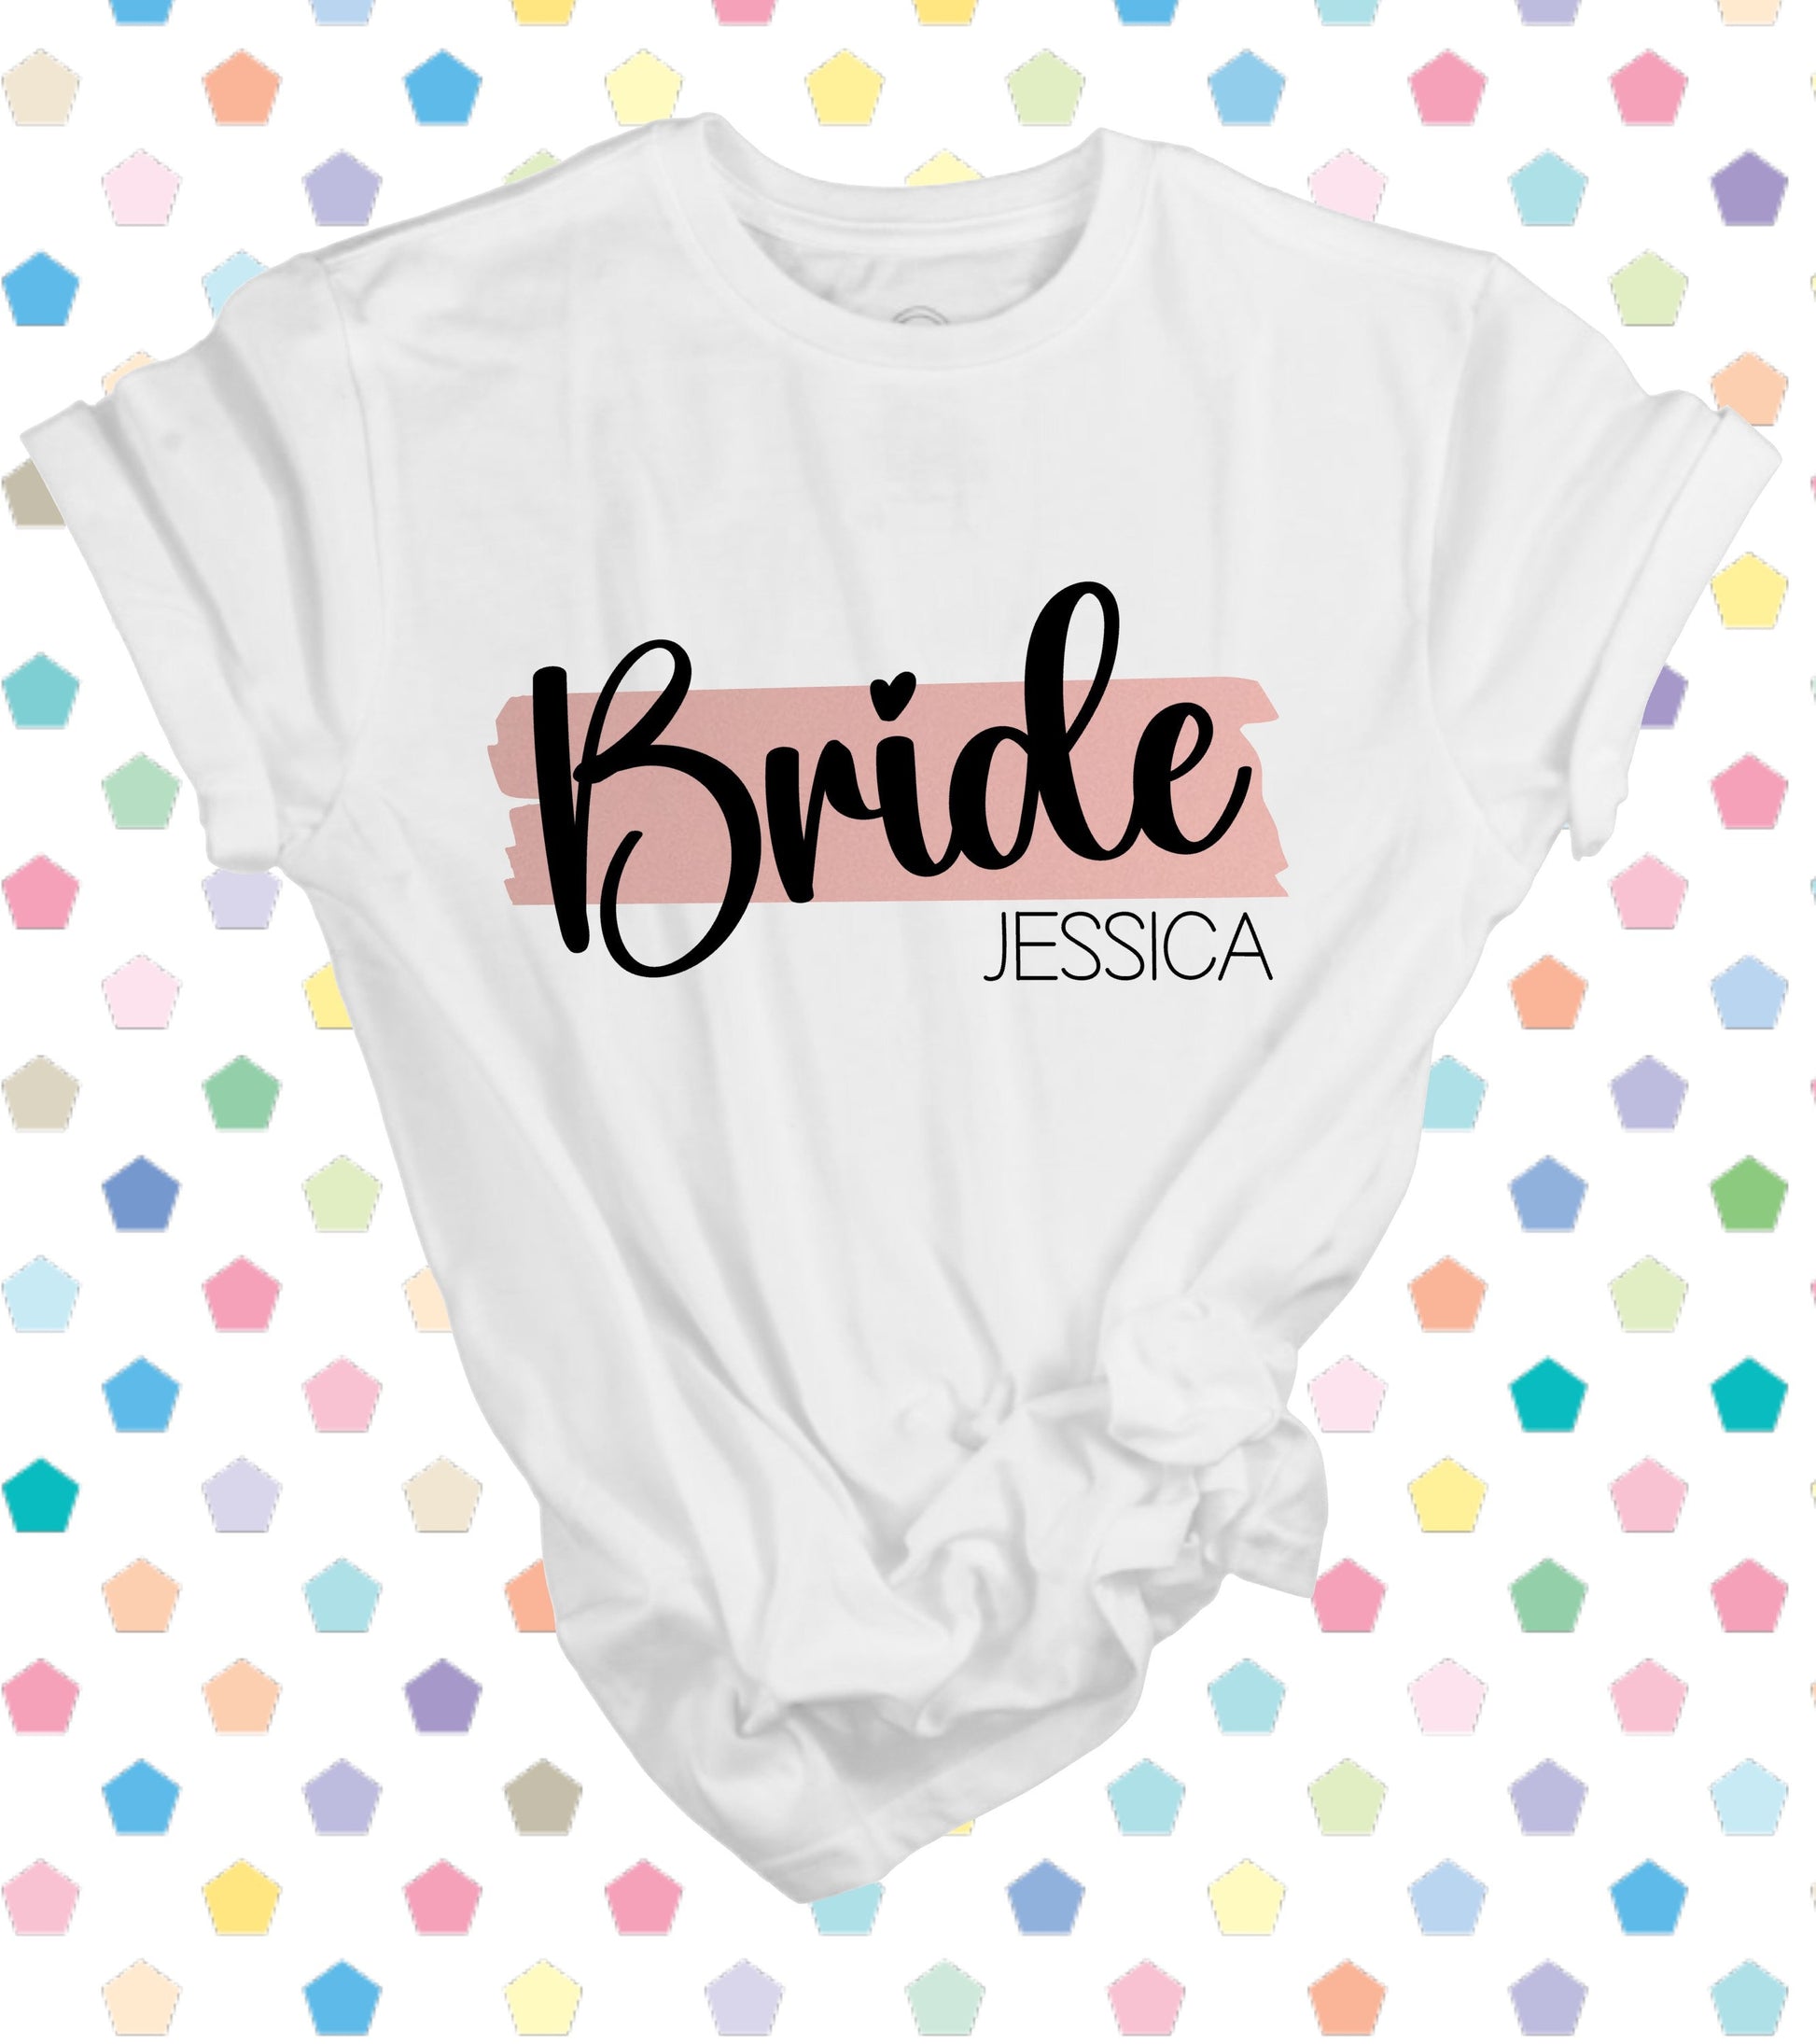 Personalised Hen Party T Shirts, Team Bride T Shirt, Hen Party Shirts, Bachelorette Party Shirts, Bachelorette Shirts, Bachelorette Gifts